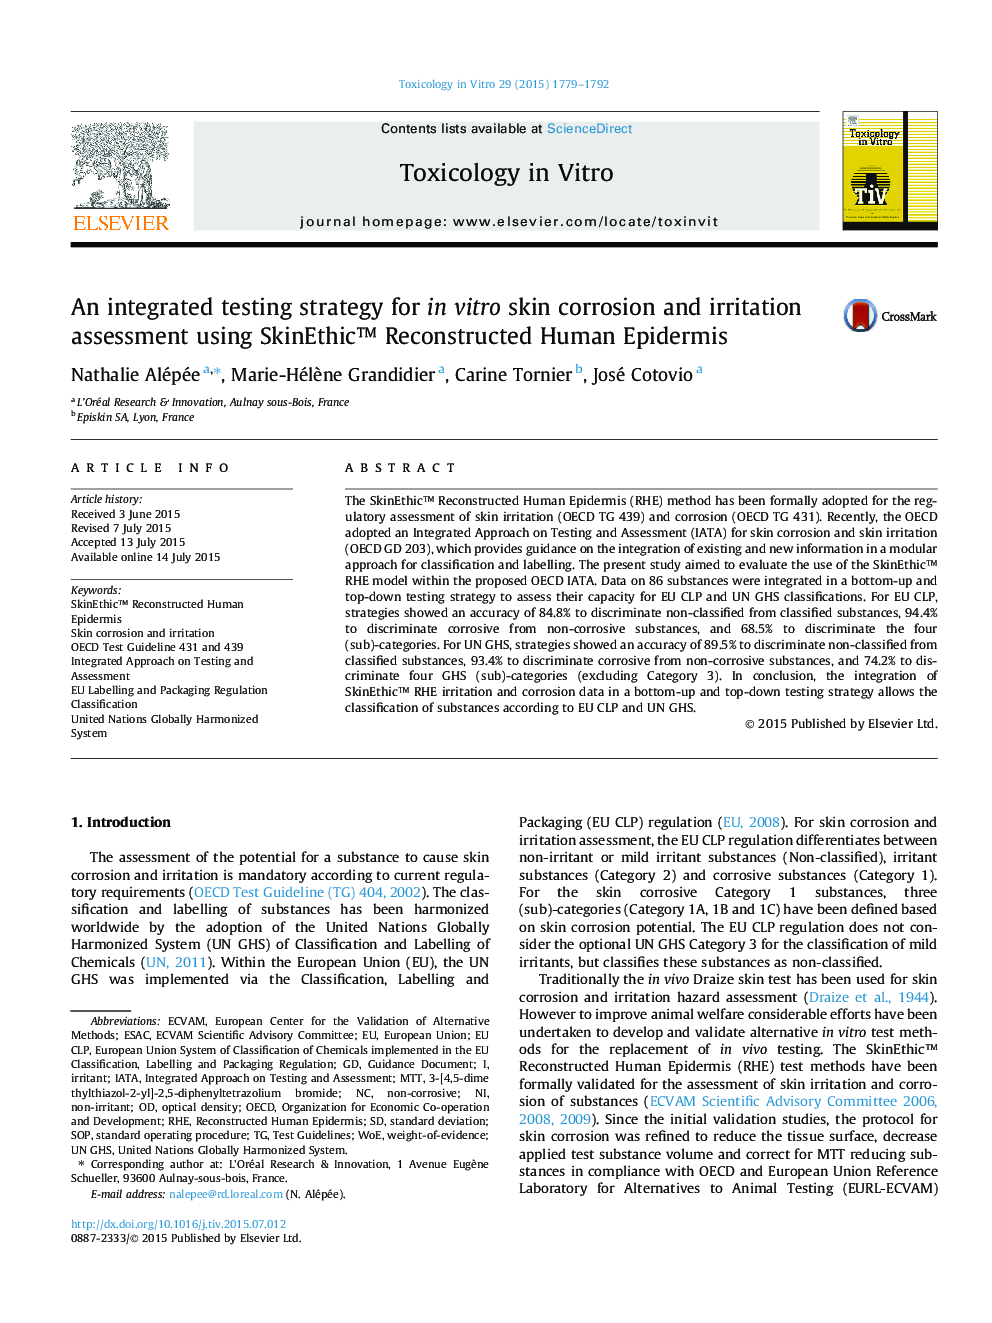 An integrated testing strategy for in vitro skin corrosion and irritation assessment using SkinEthicâ¢ Reconstructed Human Epidermis